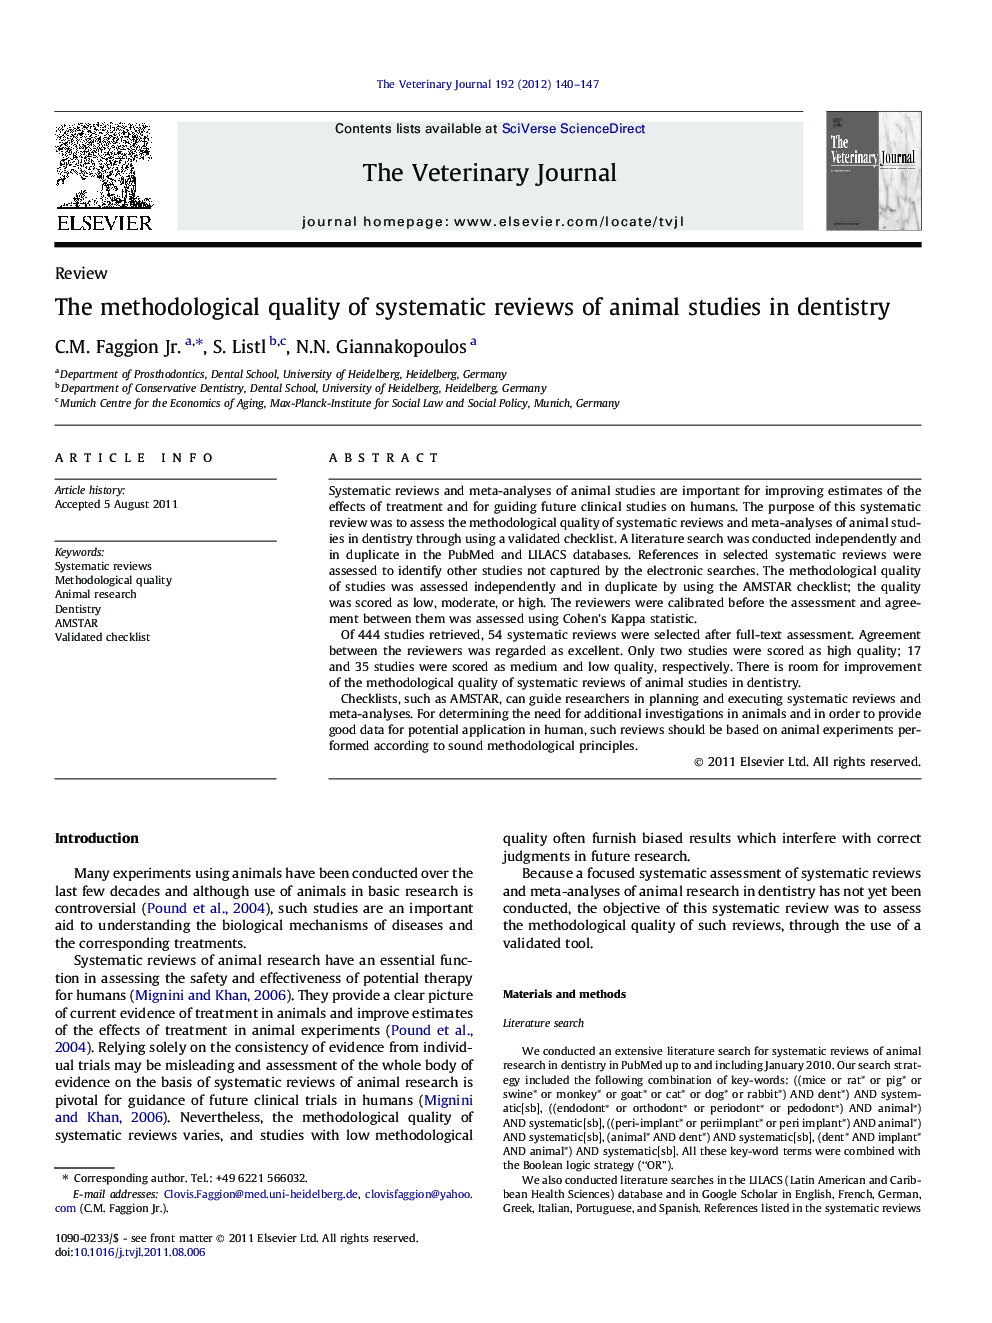 The methodological quality of systematic reviews of animal studies in dentistry